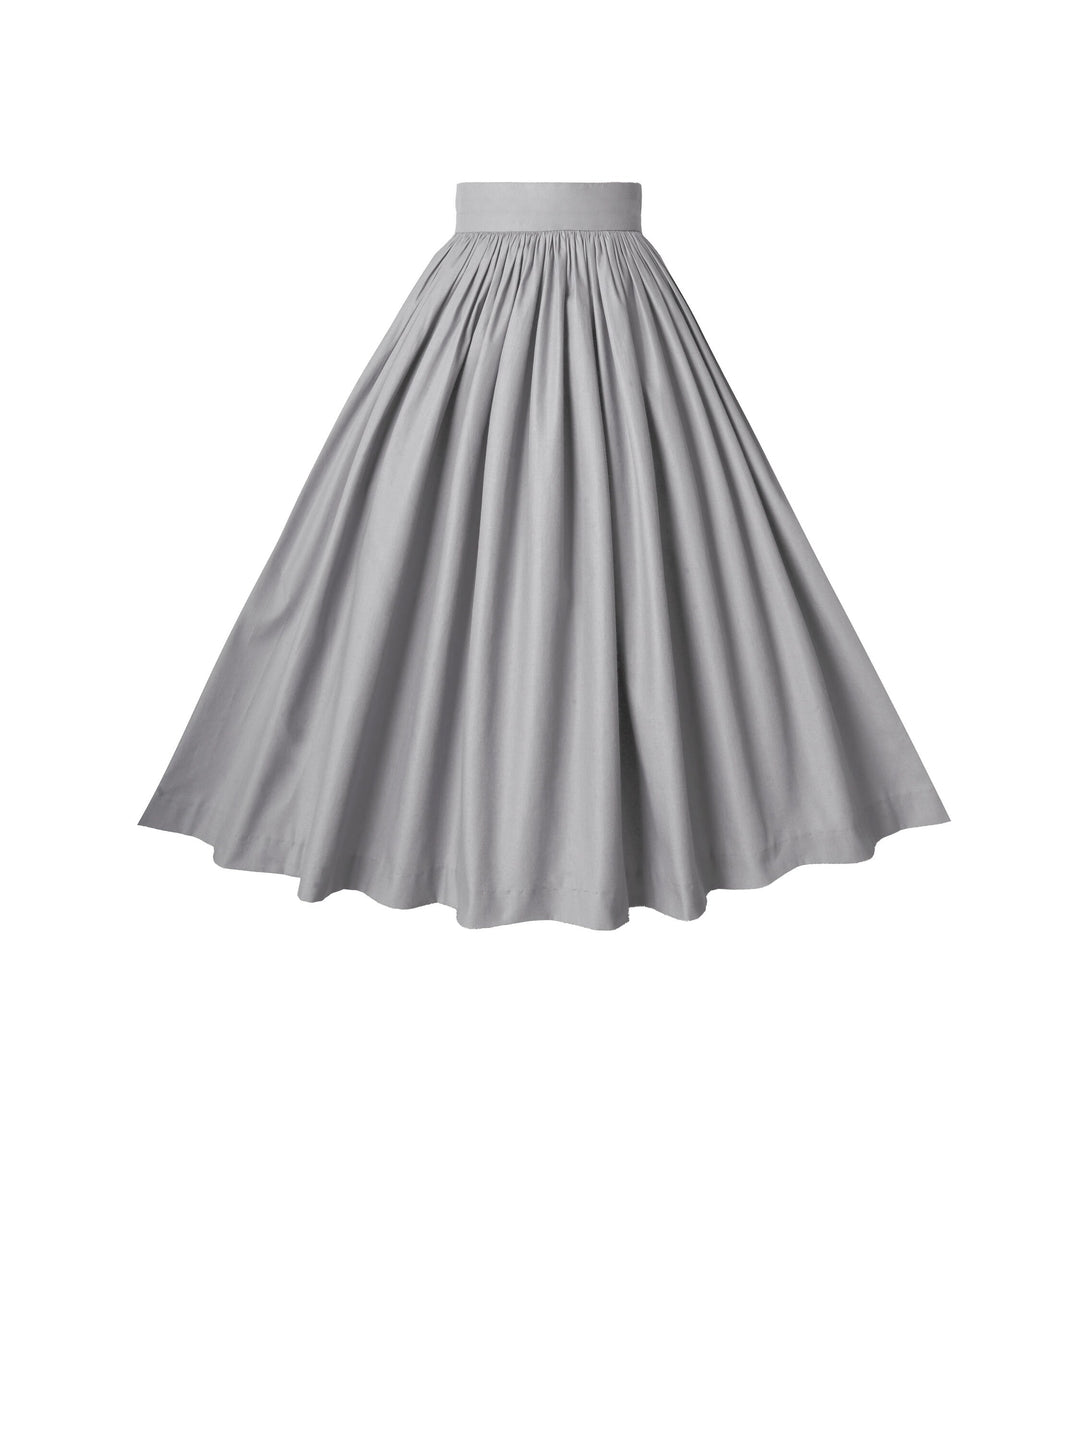 RTS - Size S - Lola Skirt in Anchor Grey Cotton